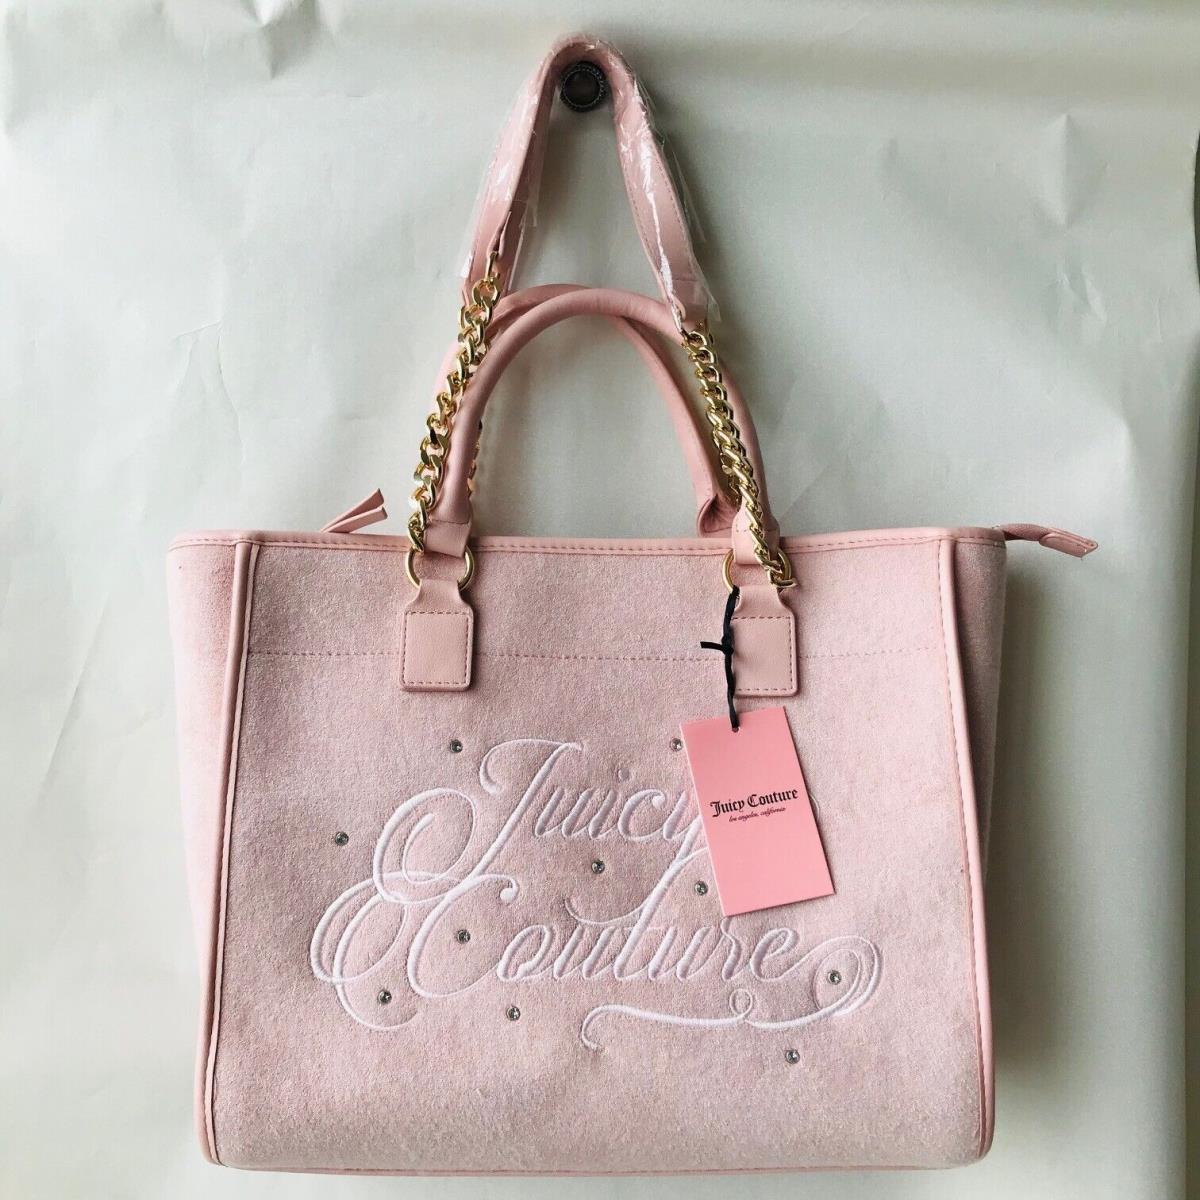 Juicy Couture Beach Tote Pink Diamond Two Handles Shoulder Bag